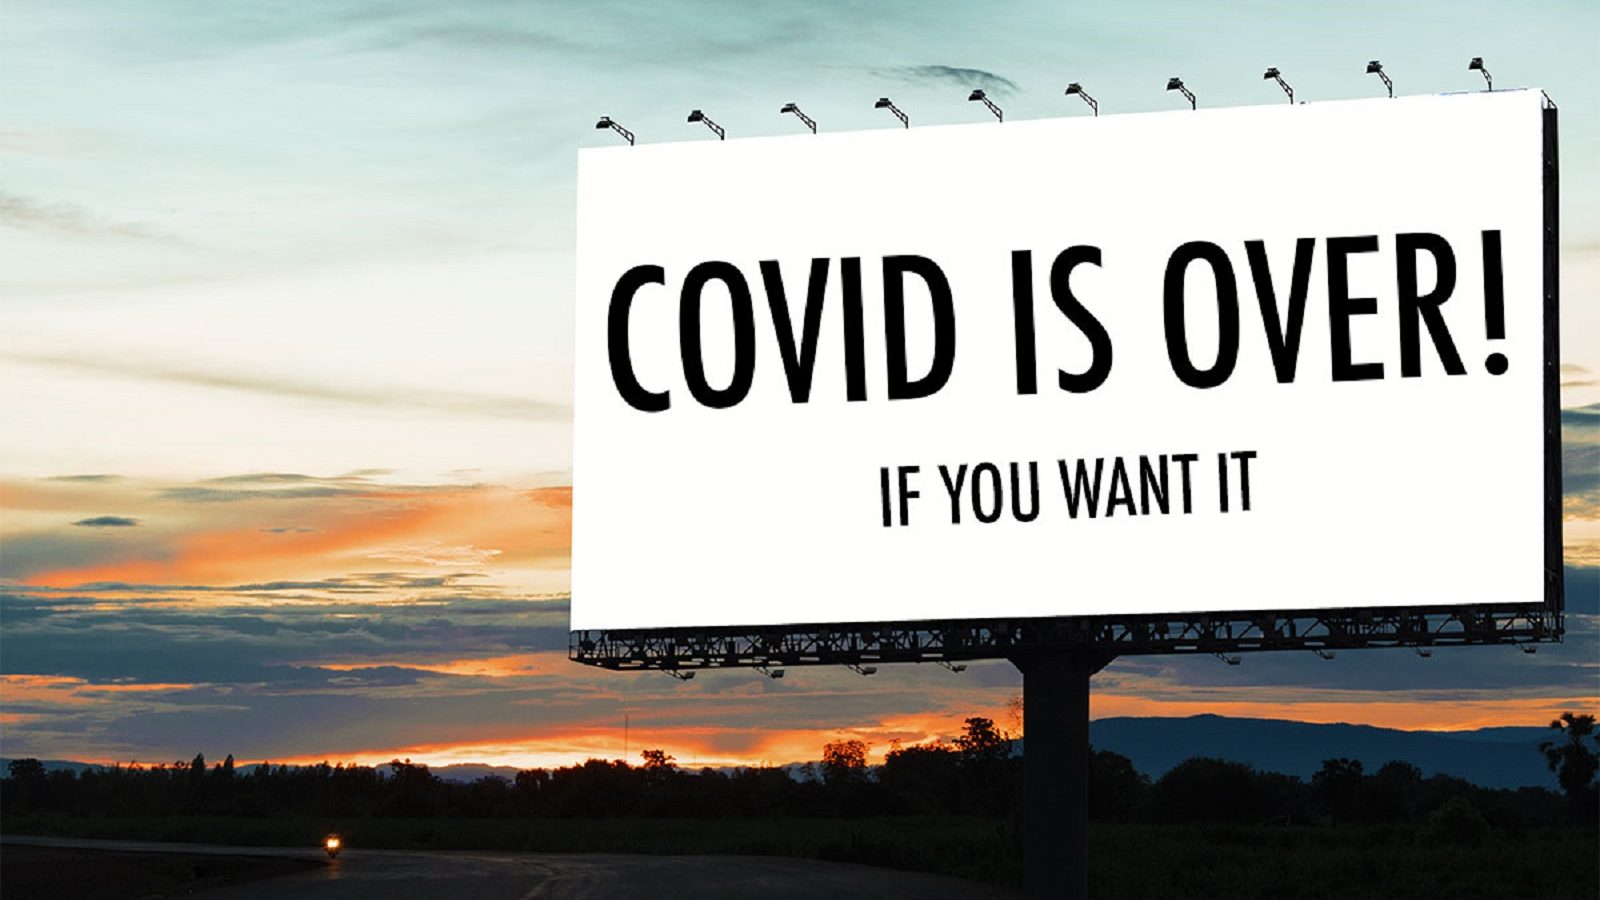 COVID is over…if you want it